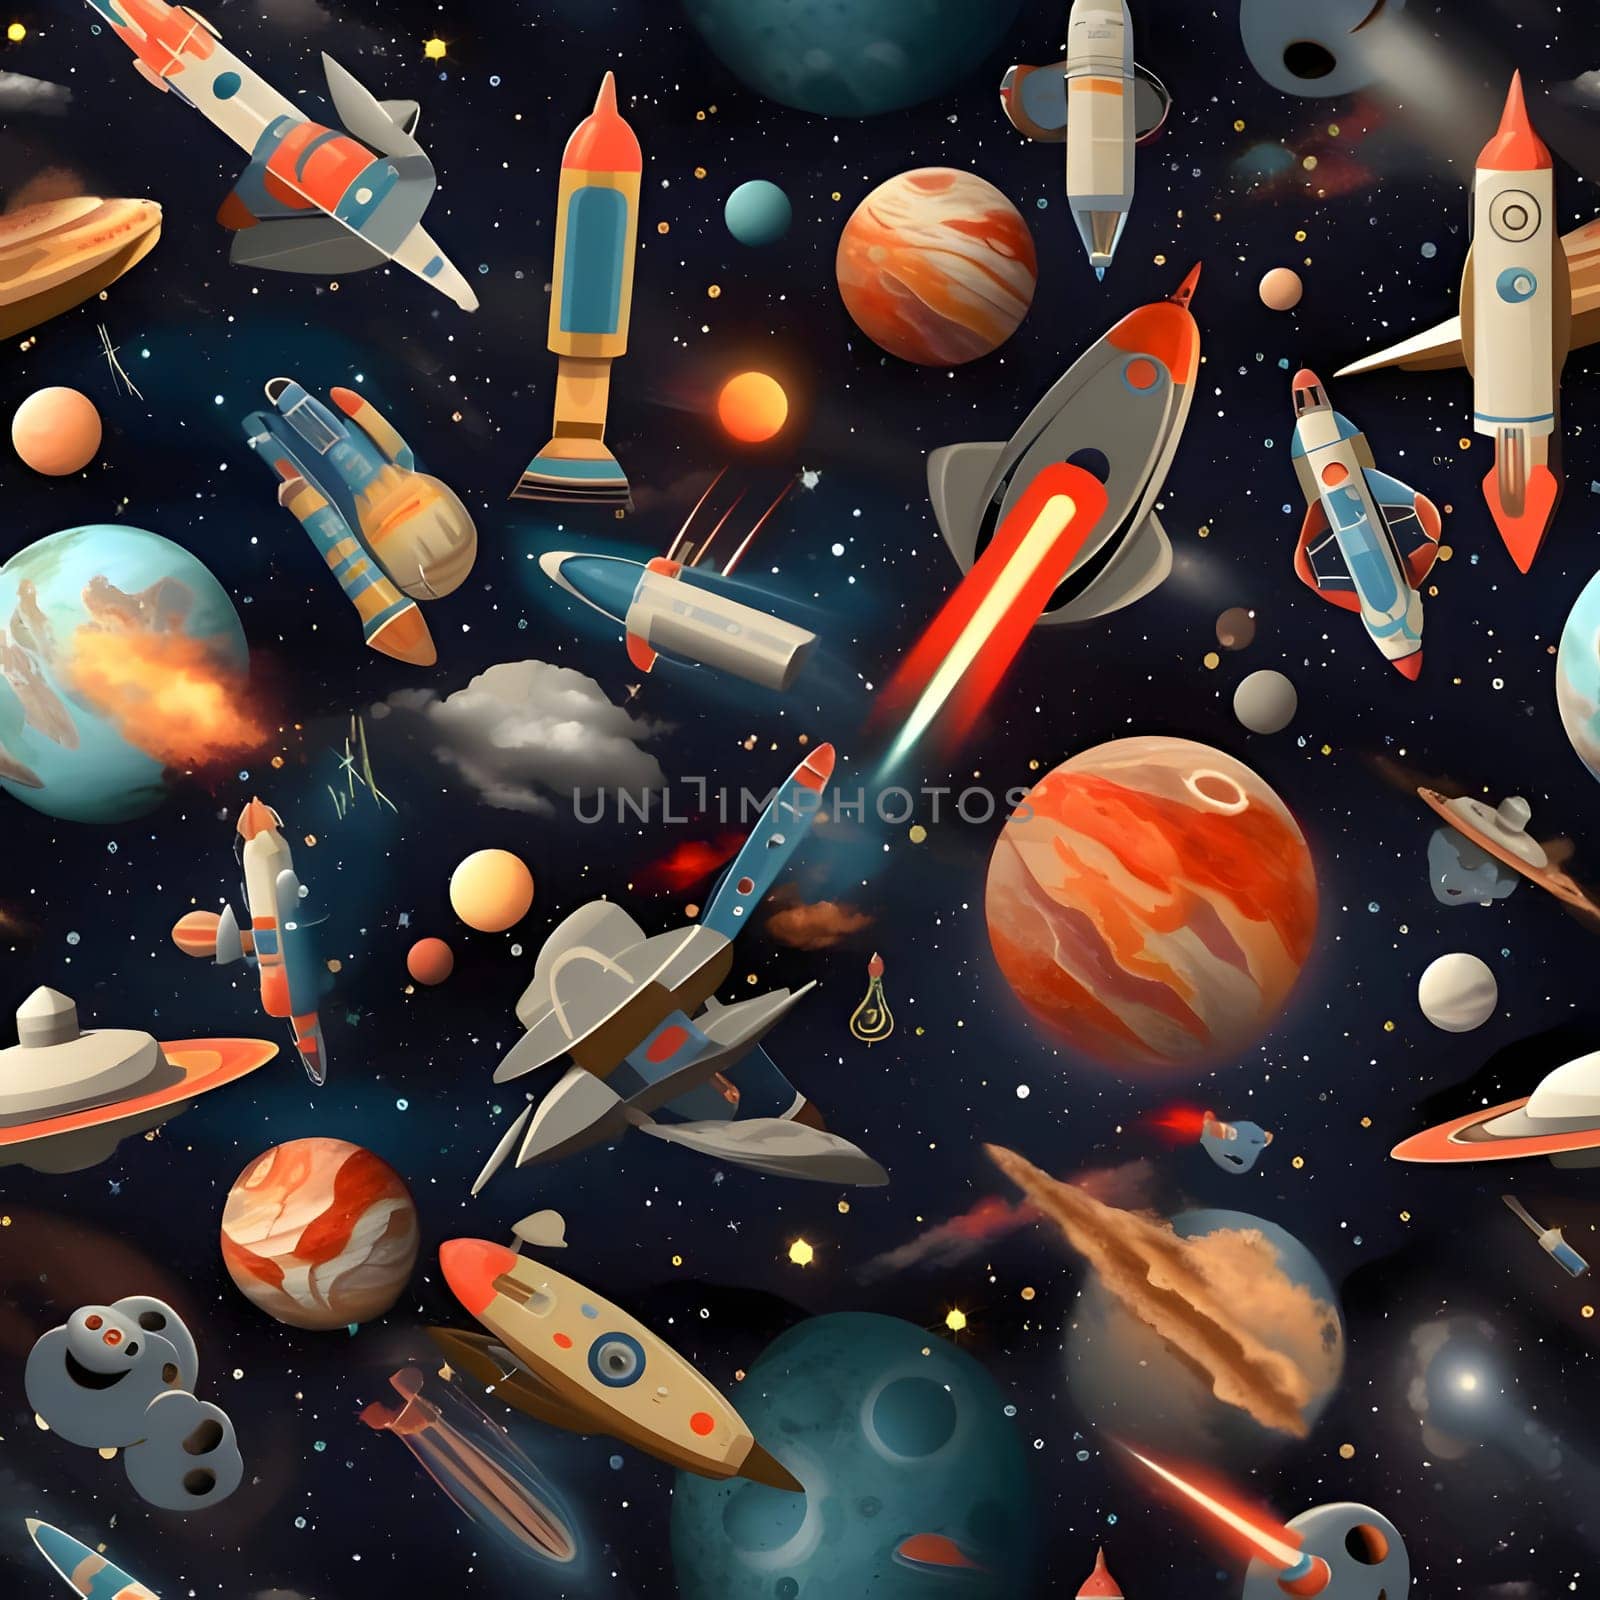 Patterns and banners backgrounds: Seamless pattern with rockets, planets and stars. Vector illustration.